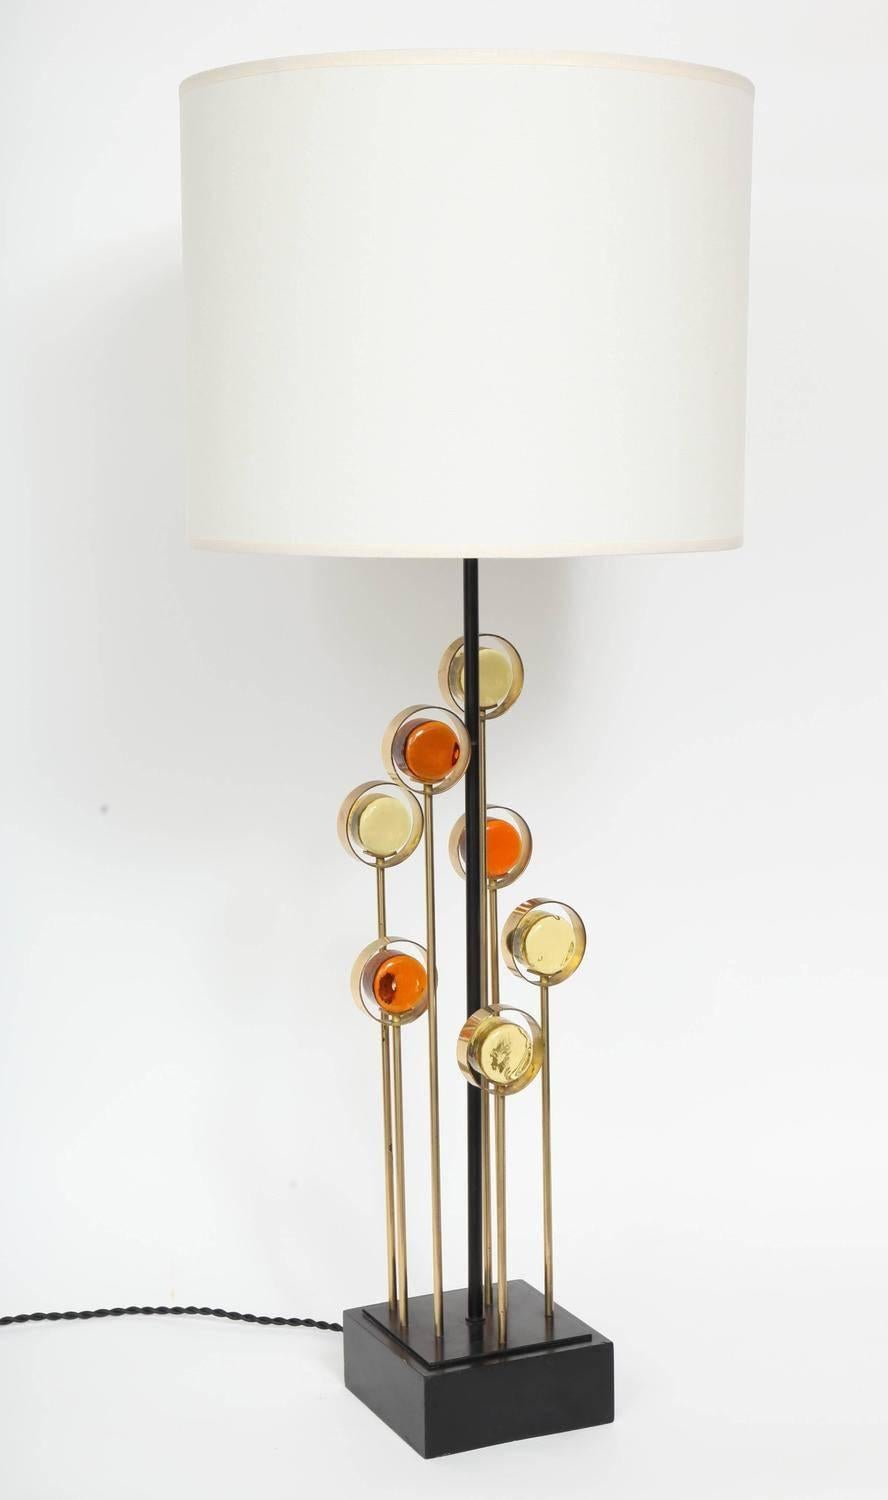 Table Lamp designed by Svend Aage manufactured for Holm Sorensen & Co. made of a wrought iron and brass frame. It's decorated with orange and yellow glass circles mounted on square black lacquered wood base and has a new custom linen shade.